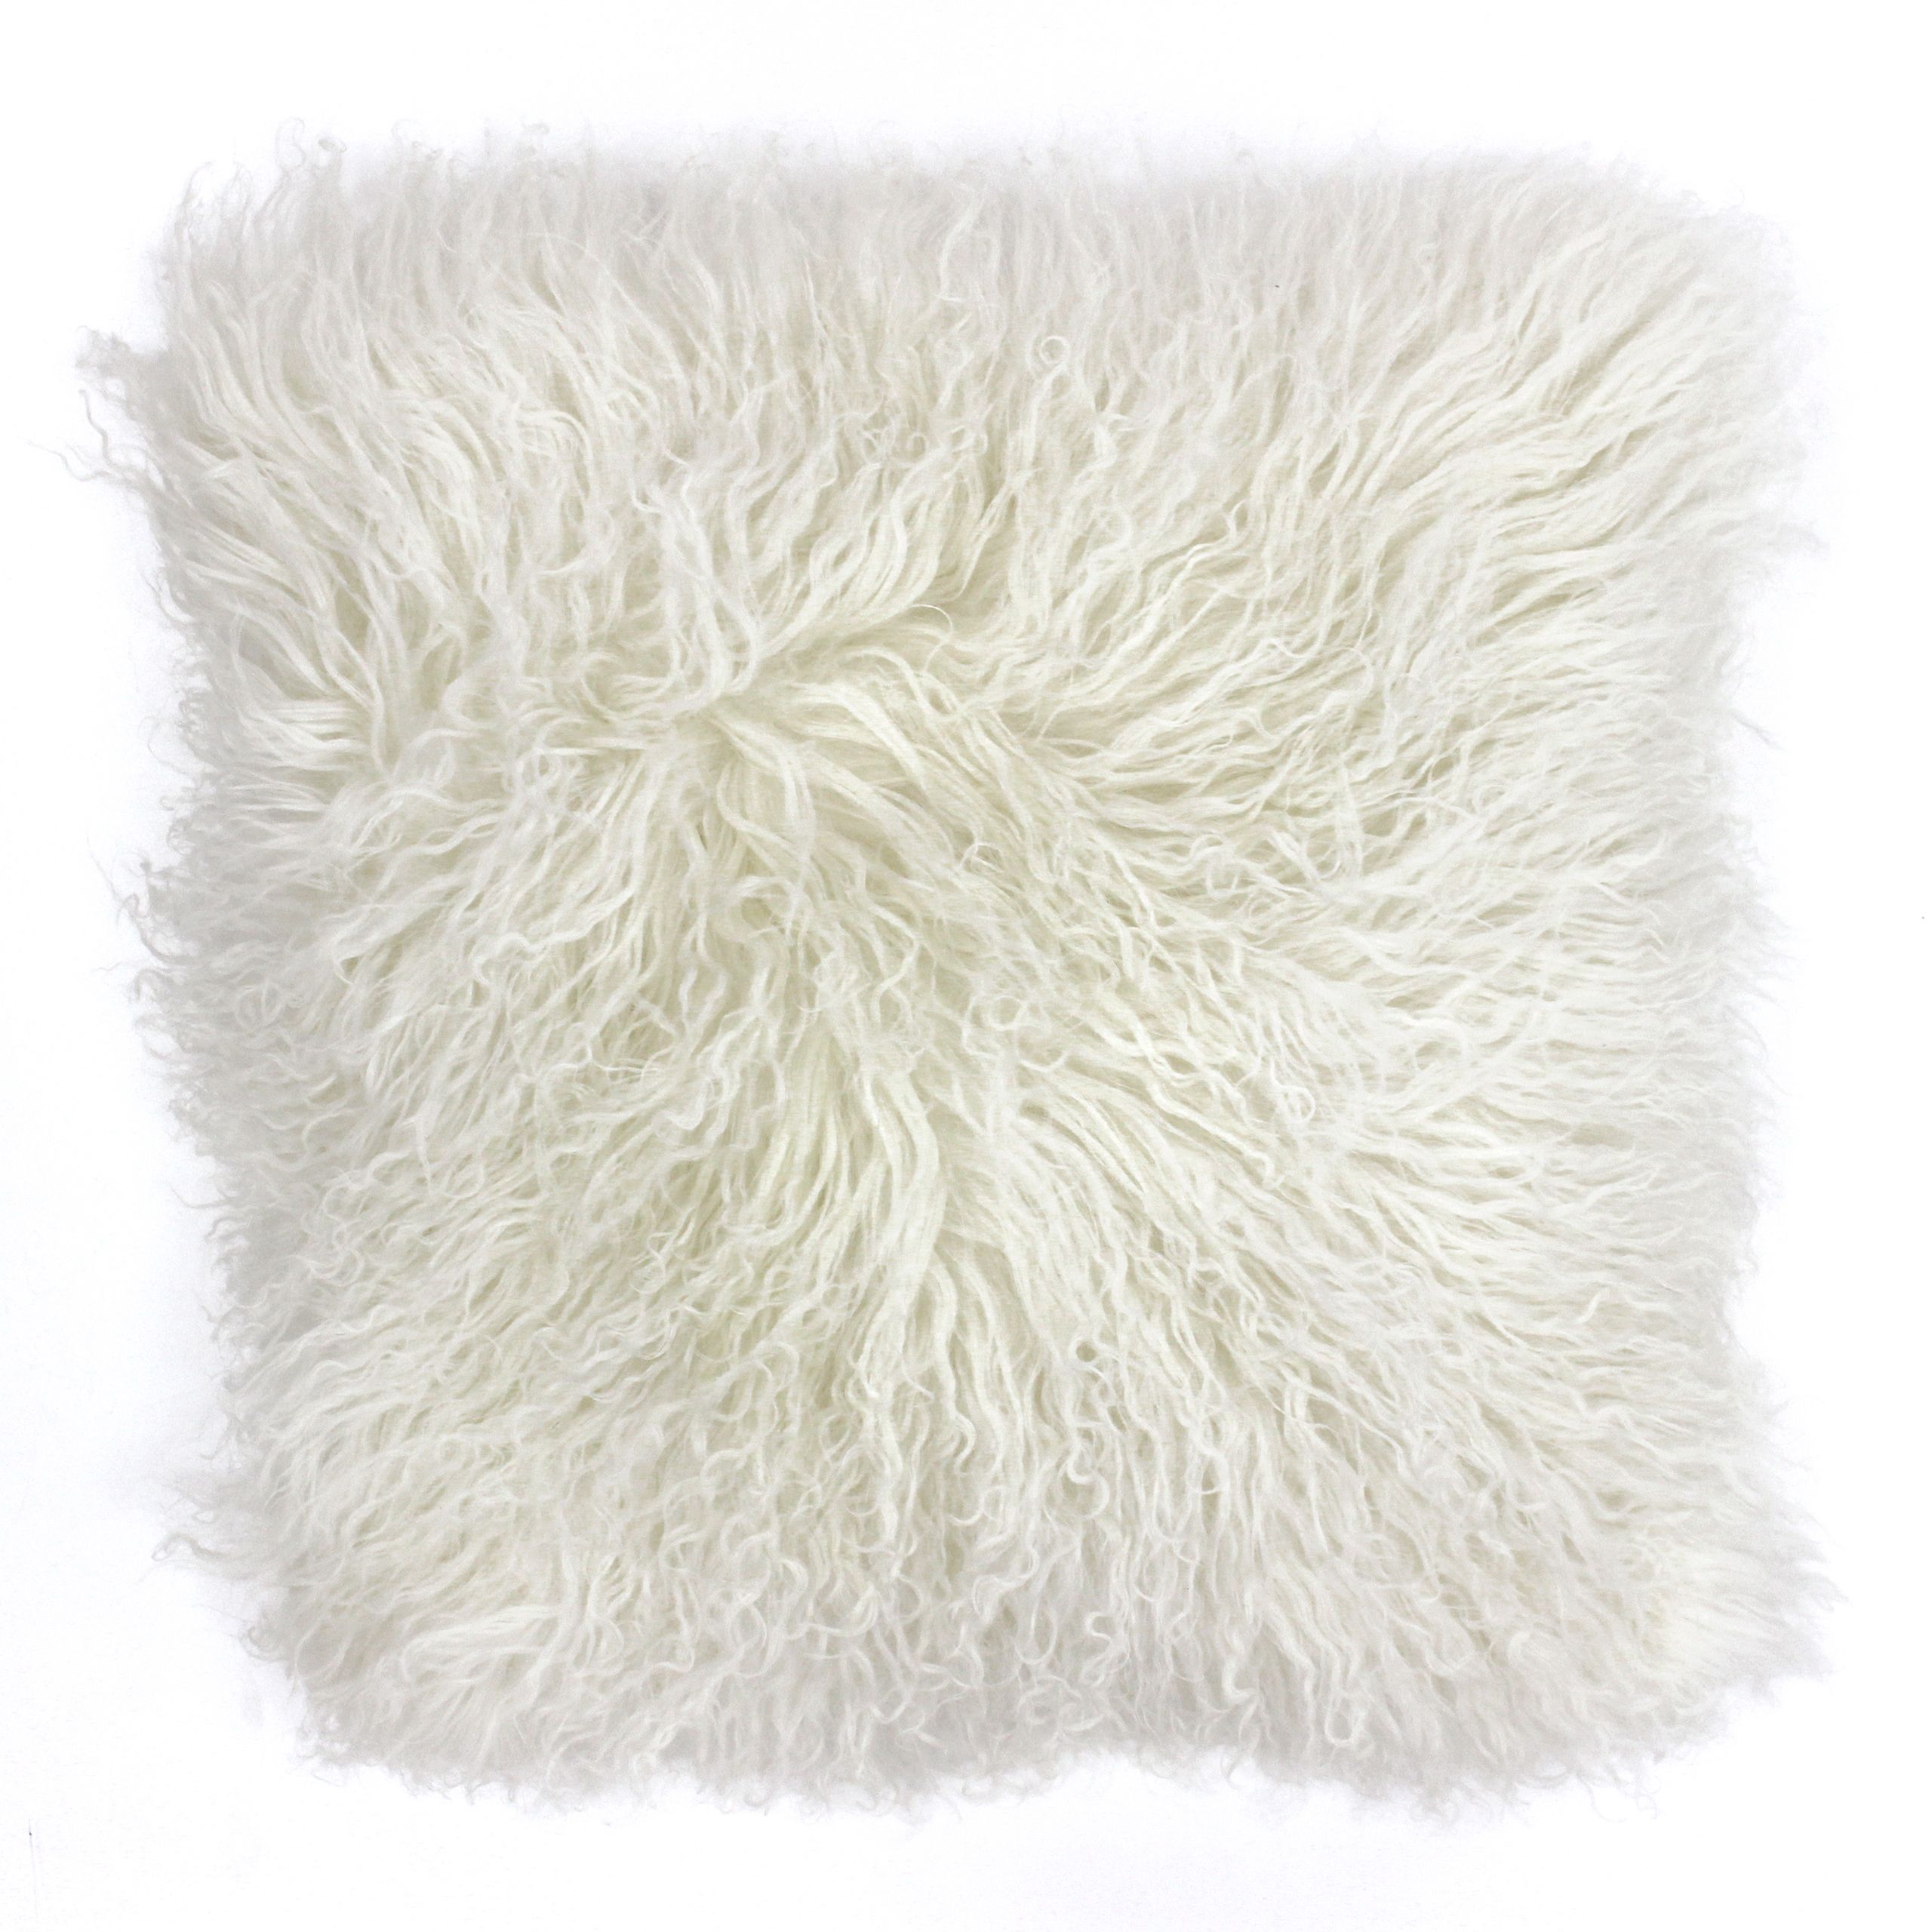 Irresistibly gorgeous the Mongolian cushion cover is an absolute dream to own. Washed fur in subtle colours is a trending fabric and can be found in the homes of some of the most influential people. Made from 100% natural sheepskin fur you'll be running your hands through its softness for years to come. The face of this cushion has a deep pile, fur front in a range of soft pastel colours while the reverse is made of soft faux suede in colour-coordinated tones. Complete with knife edging and a zip closure, concealed with a strip of fabric, this cushion is unbelievably cosy and will work perfectly on sofas and beds. Versatile and adaptable this cushion cover can be worked into a range of interiors such as a minimalist bedroom display or to add a soft touch to a leather sofa. Please note fur texture ranges and may appear curlier or straighter to image. To ensure this cushion will last for years to come treat it carefully and dry clean only. Do not iron and lay flat to dry for the best results.